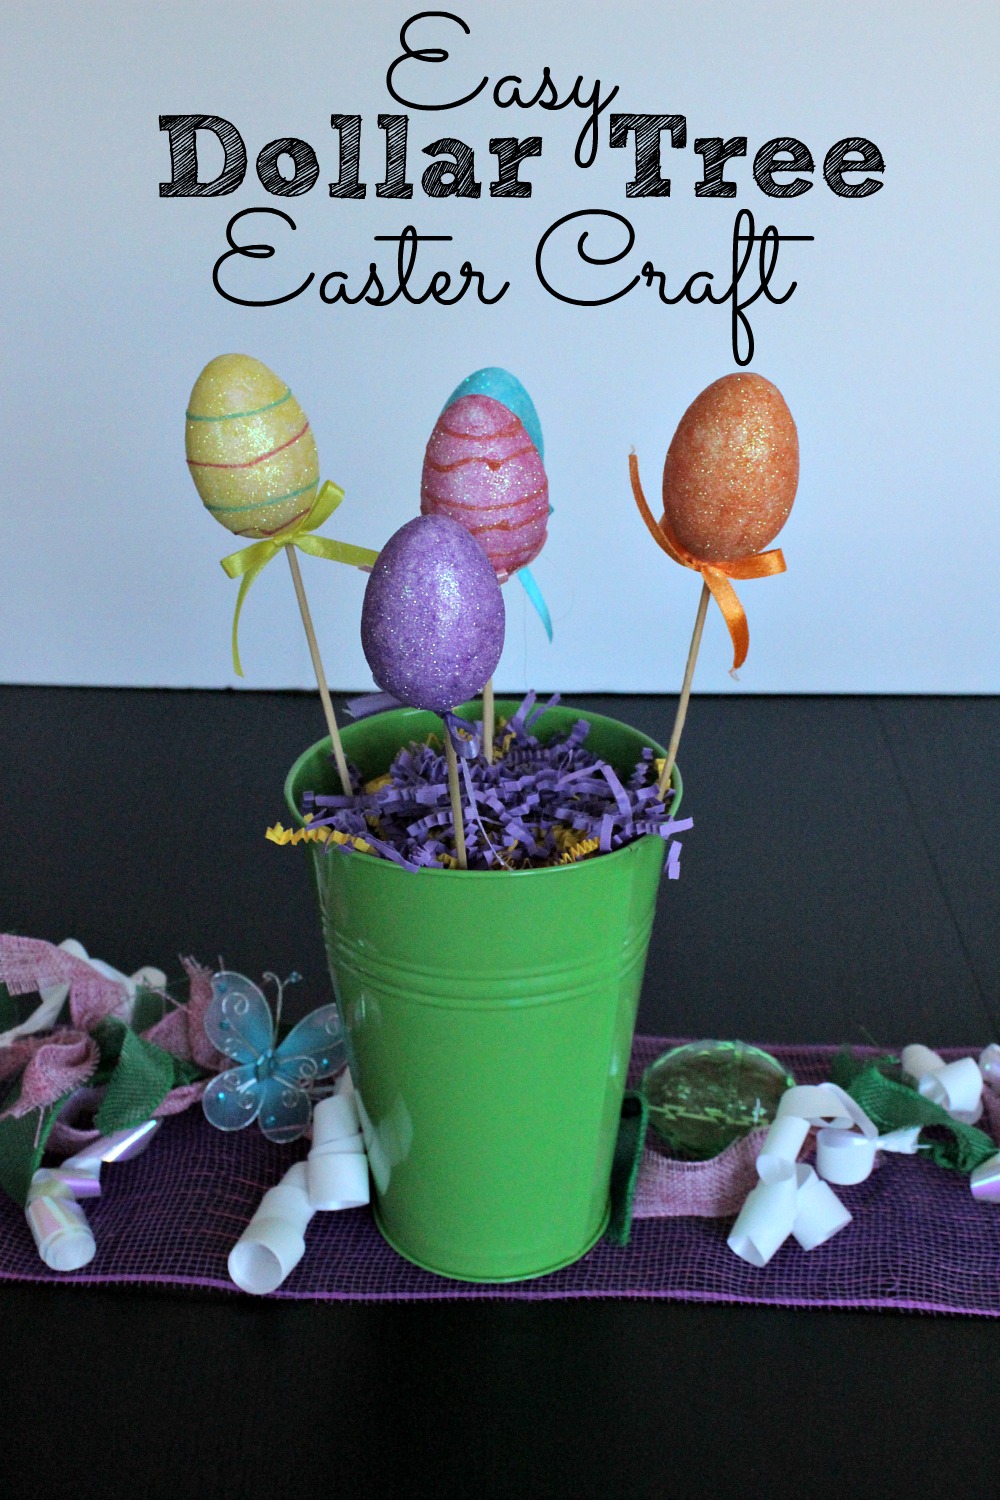 The Best Dollar Tree Easter Crafts Home, Family, Style and Art Ideas